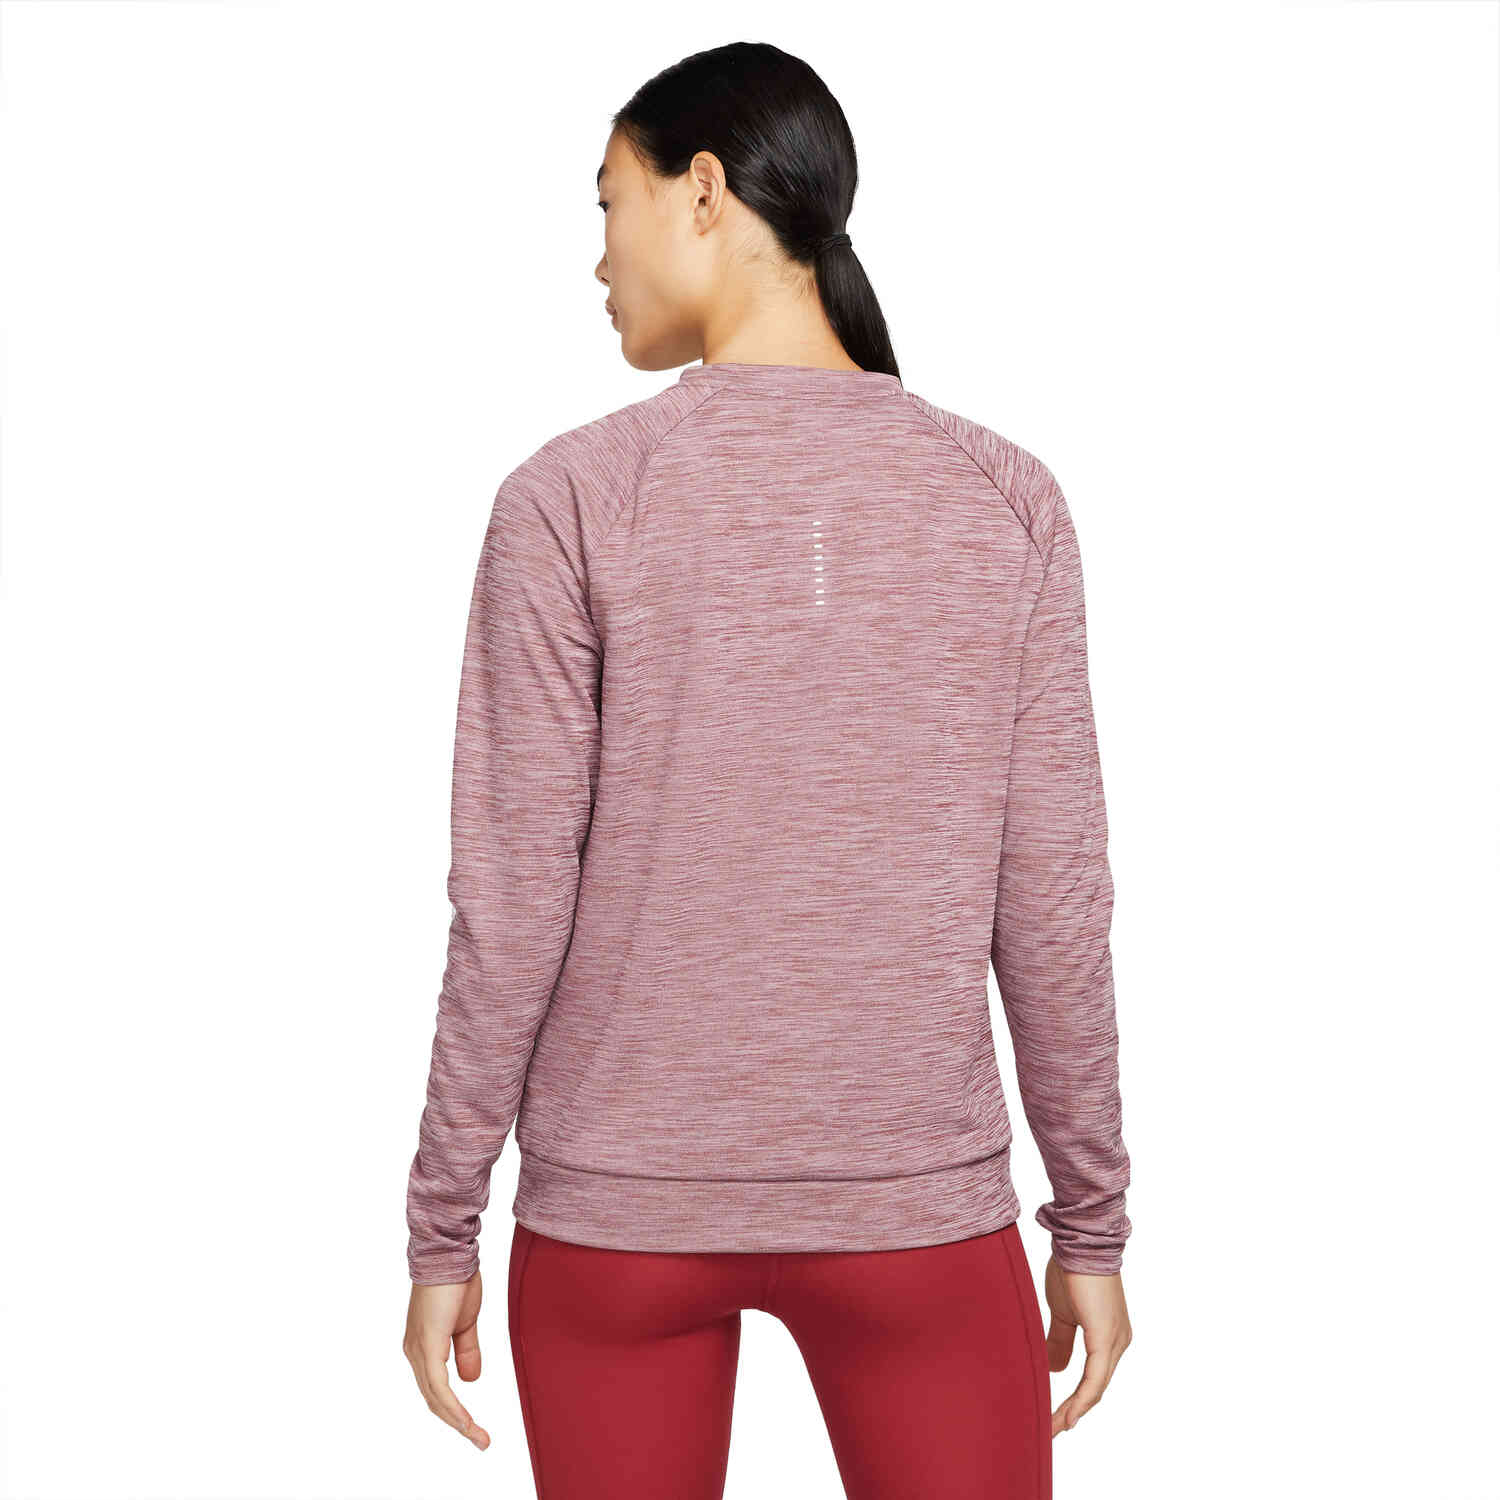 Women's Nike Pacer Crew - Pomegranate & Heather with Reflective Silver ...